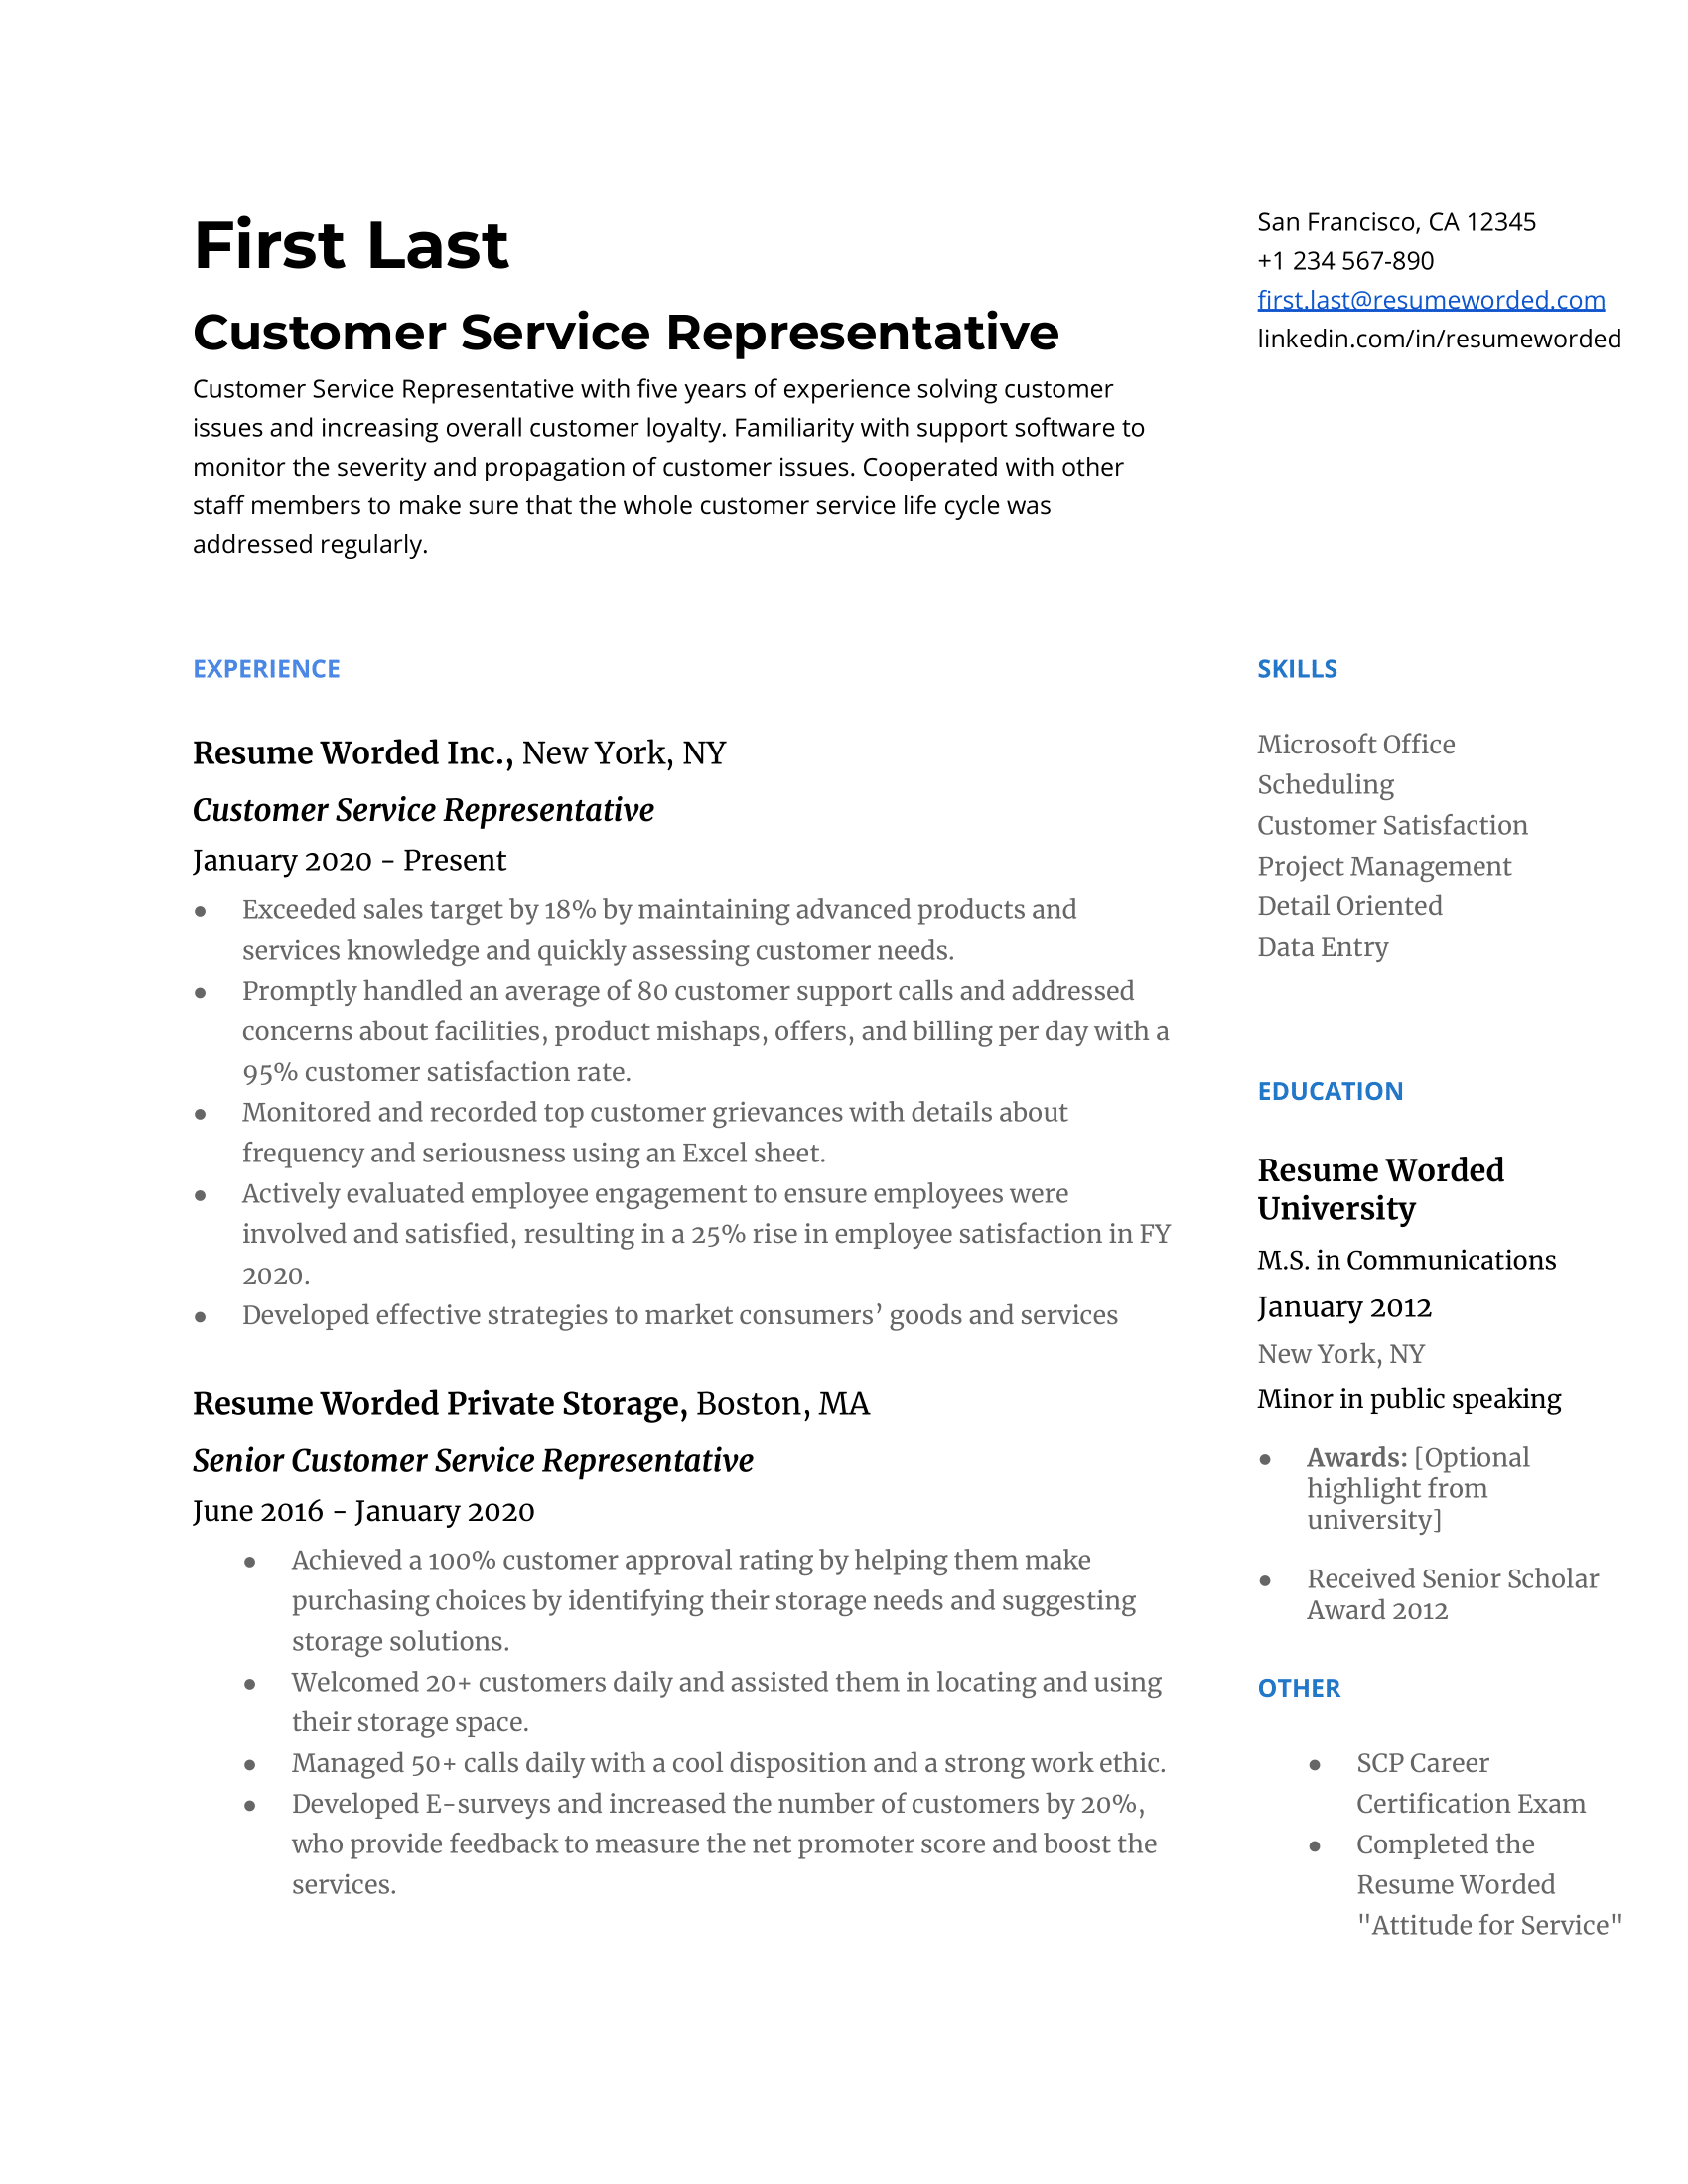 Use this resume template with strong bullet points to apply to be a customer service representative.